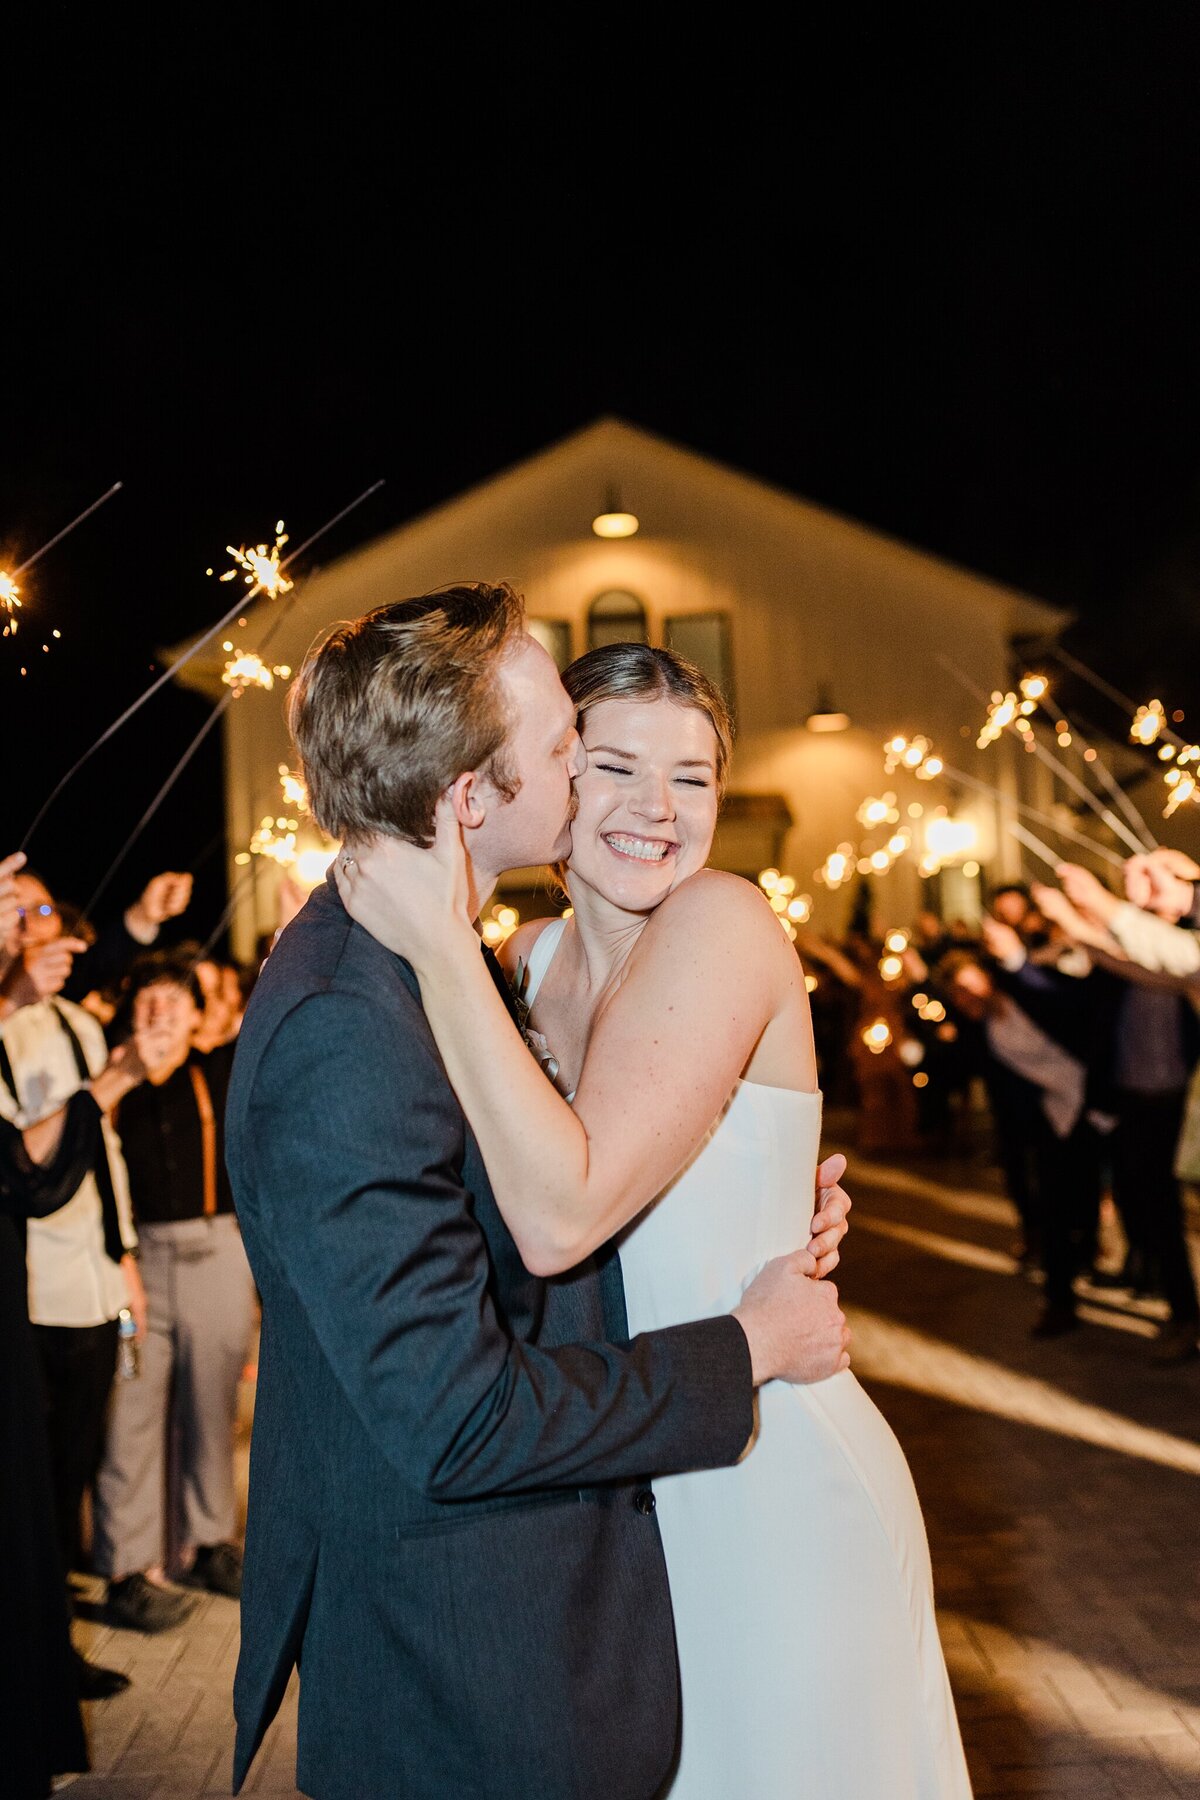 A bride receiving a kiss on the cheek from a groom during their sparkler exit after their wedding reception in Dallas, Texas. The bride is on the right and is wearing an elegant, sleeveless, white dress. The groom is on the left and is wearing a dark suit. Their guests create two long lines on either side of them and hold up lit sparklers in celebration.